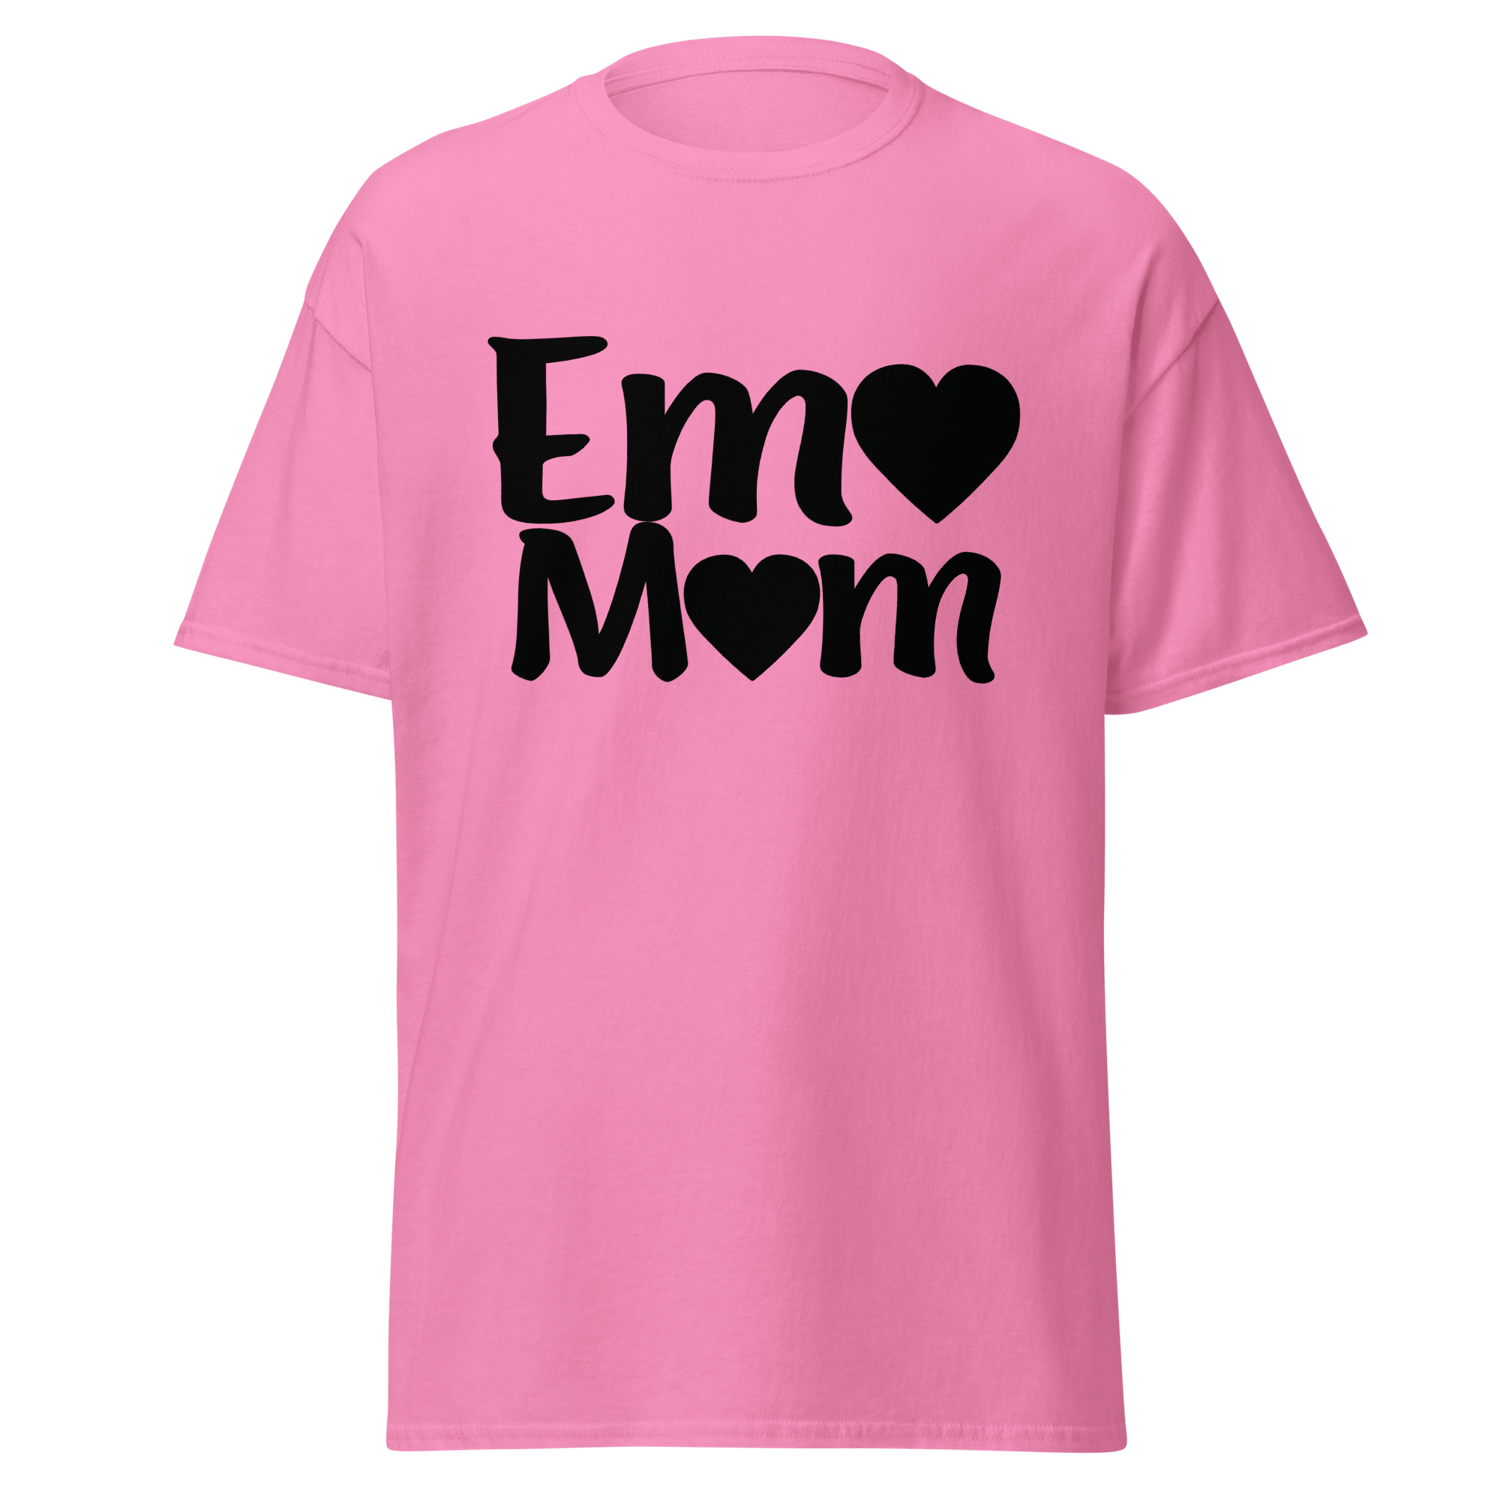 Emo Mom Hearts | The Warped Tour Band